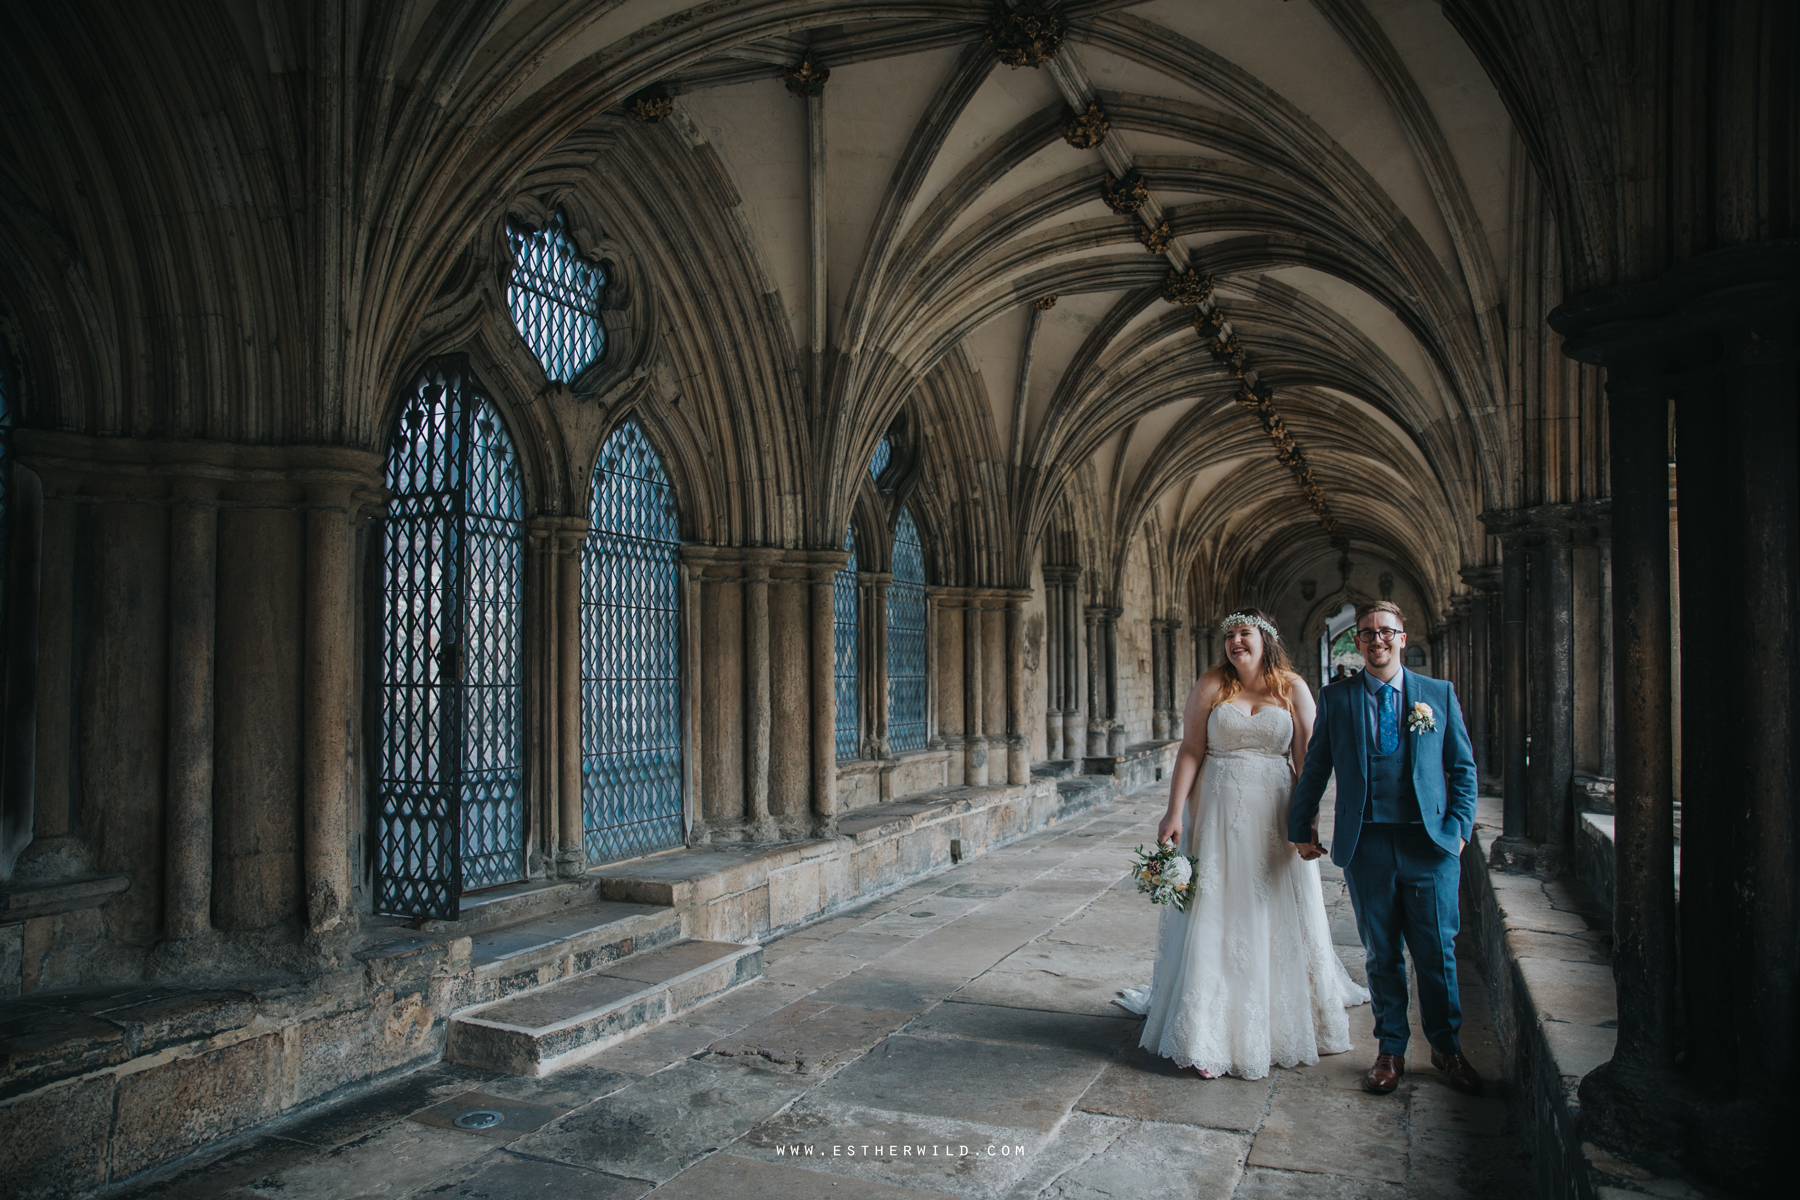 Norwich_Castle_Arcade_Grosvenor_Chip_Birdcage_Cathedral_Cloisters_Refectory_Wedding_Photography_Esther_Wild_Photographer_Norfolk_Kings_Lynn_3R8A1866.jpg